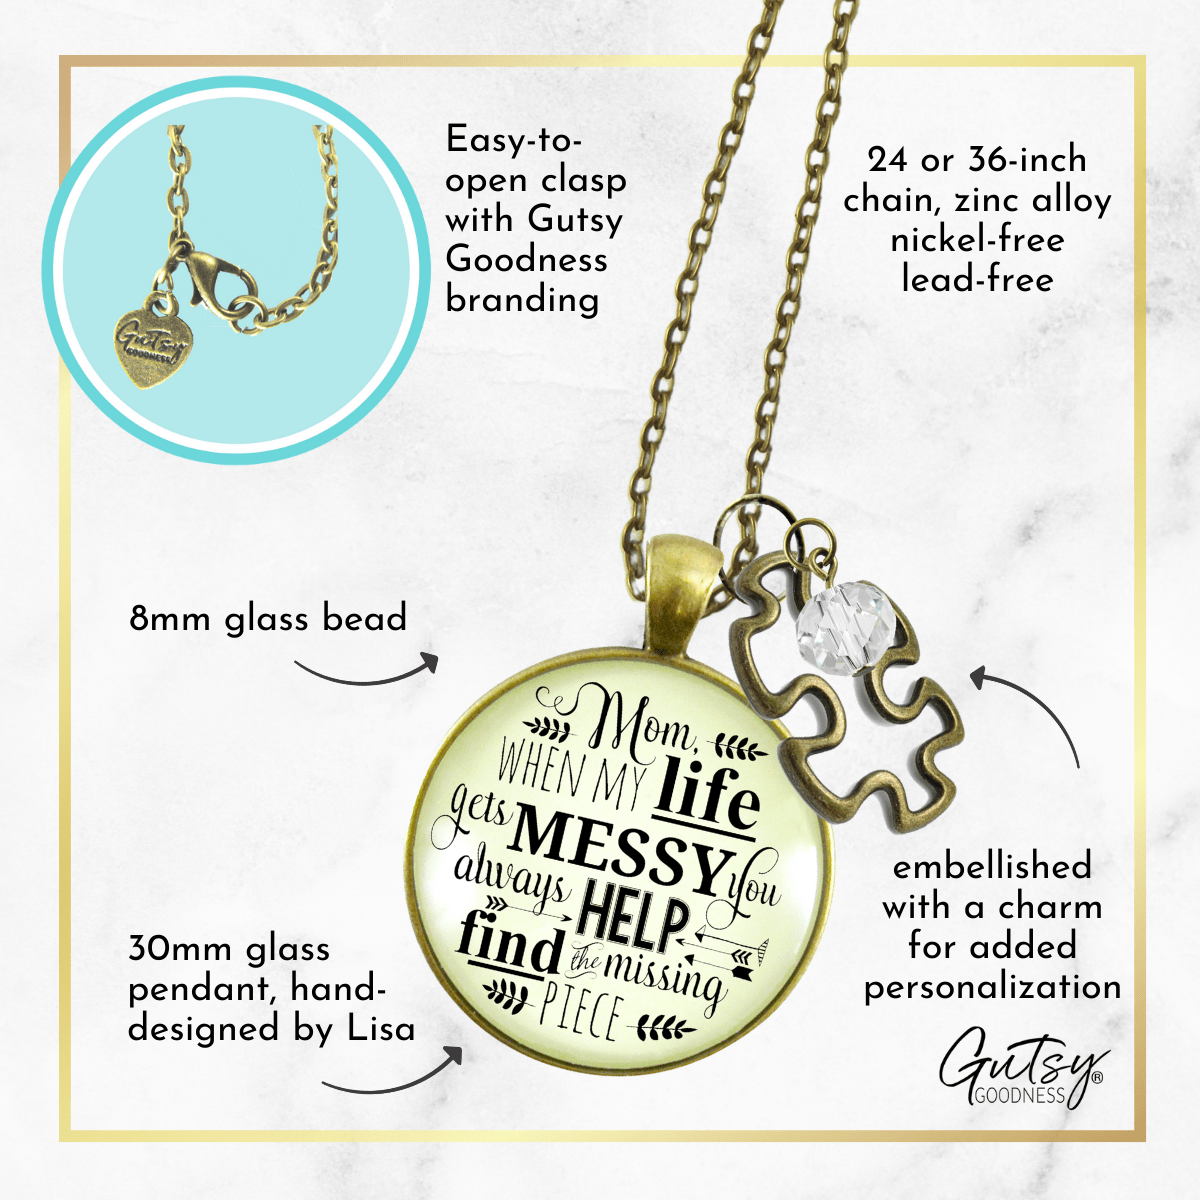 Gutsy Goodness Mom Necklace Life Gets Messy Quote Love You Jewelry from Daughter - Gutsy Goodness Handmade Jewelry;Mom When Life Gets Messy - Gutsy Goodness Handmade Jewelry Gifts